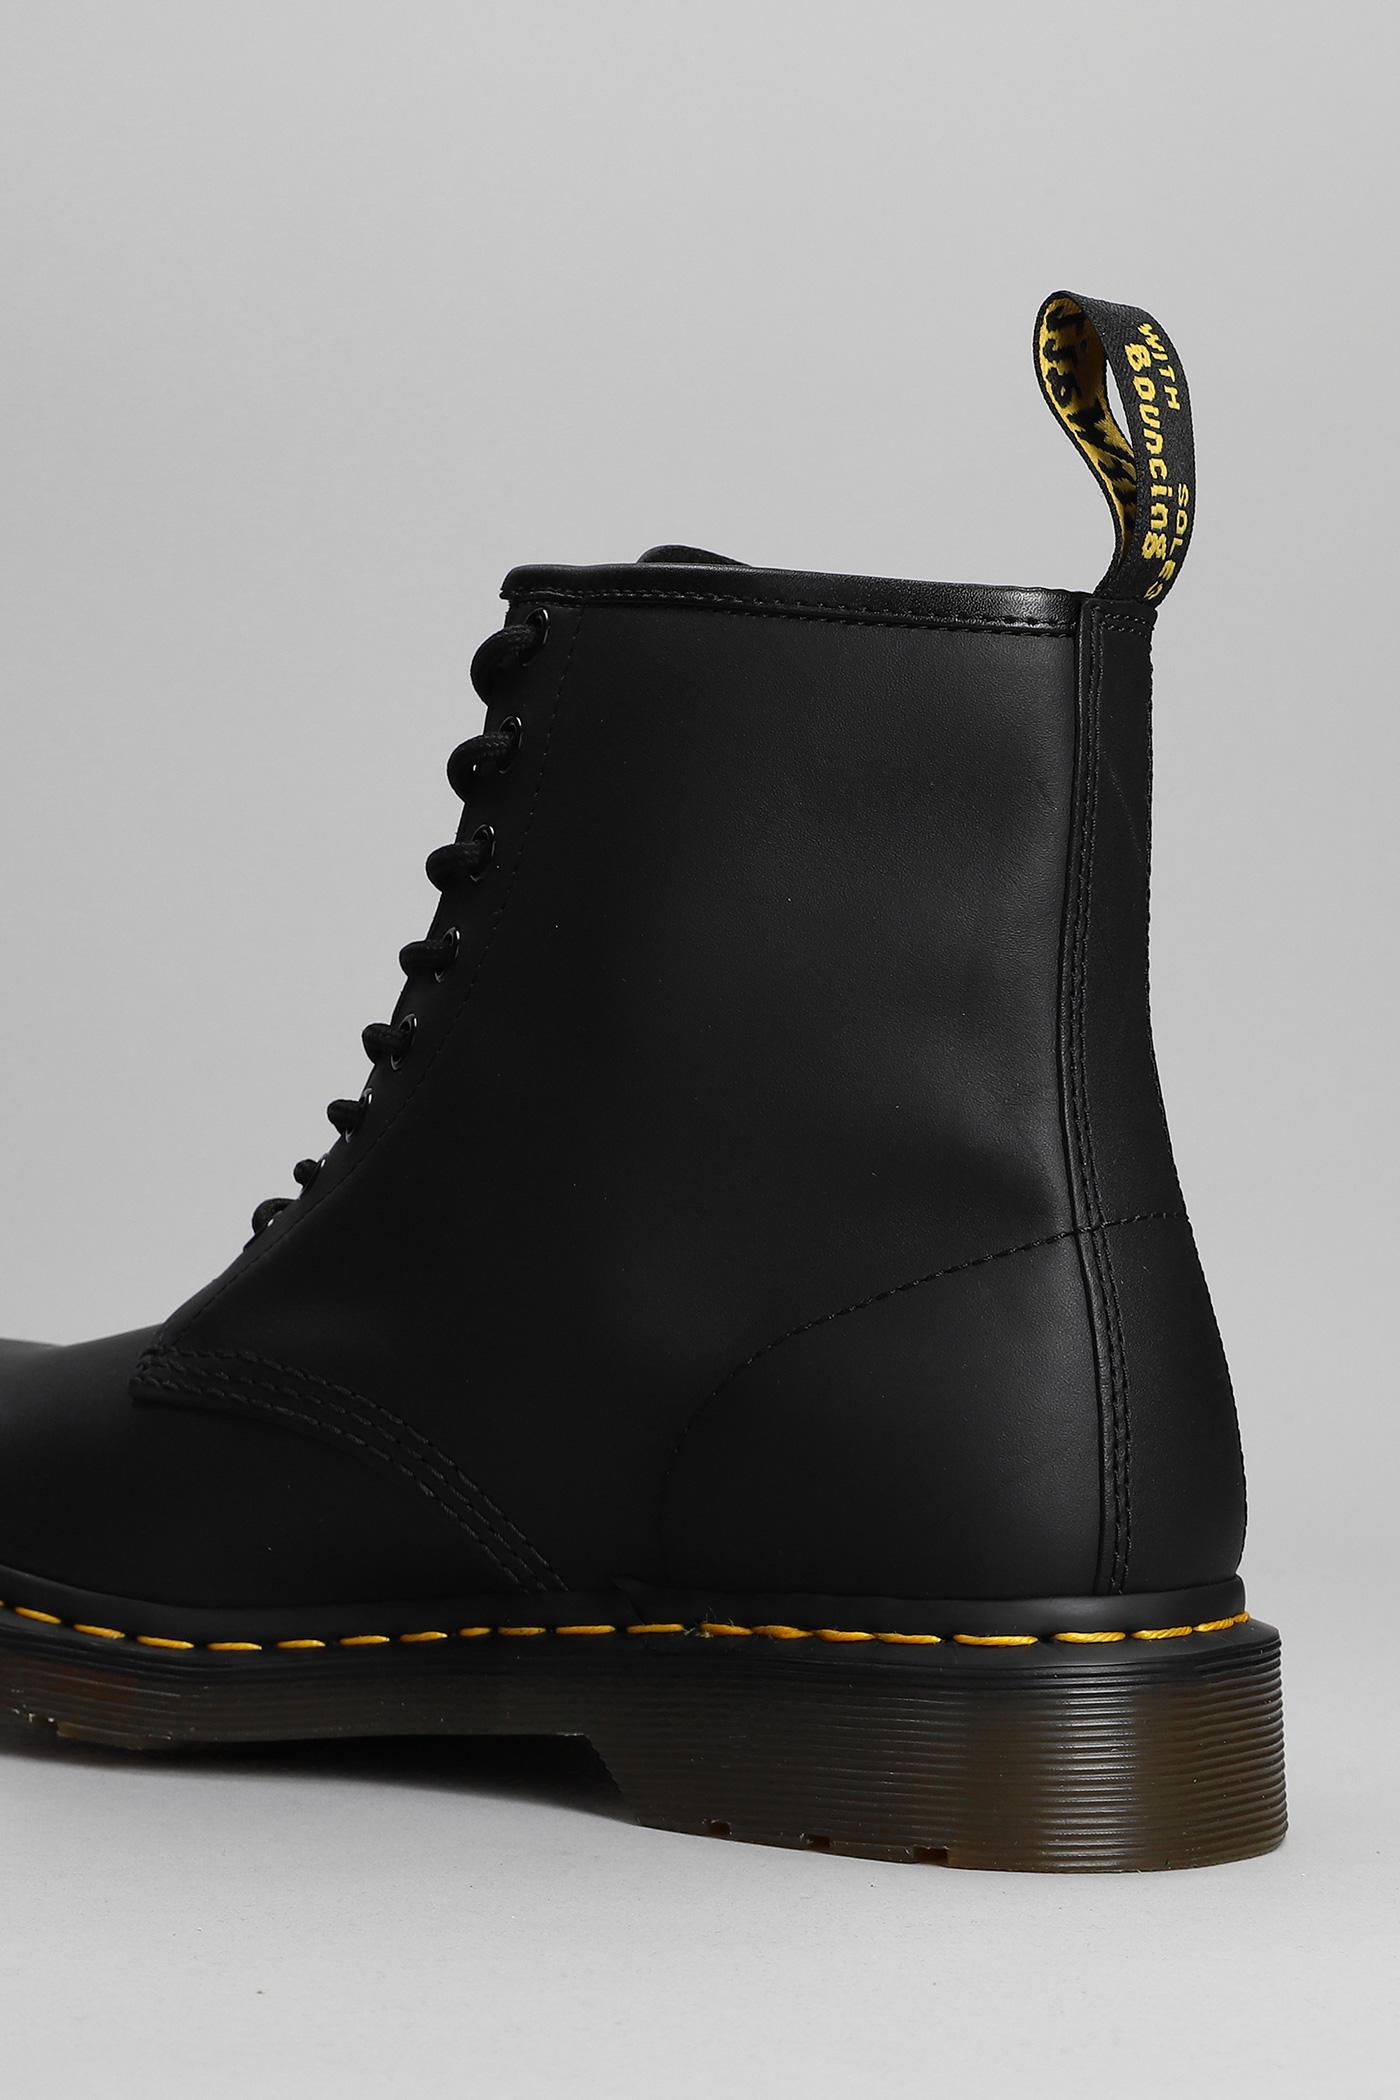 Dr. Martens 1460 Greasy Combat Boots In Black Leather for Men | Lyst